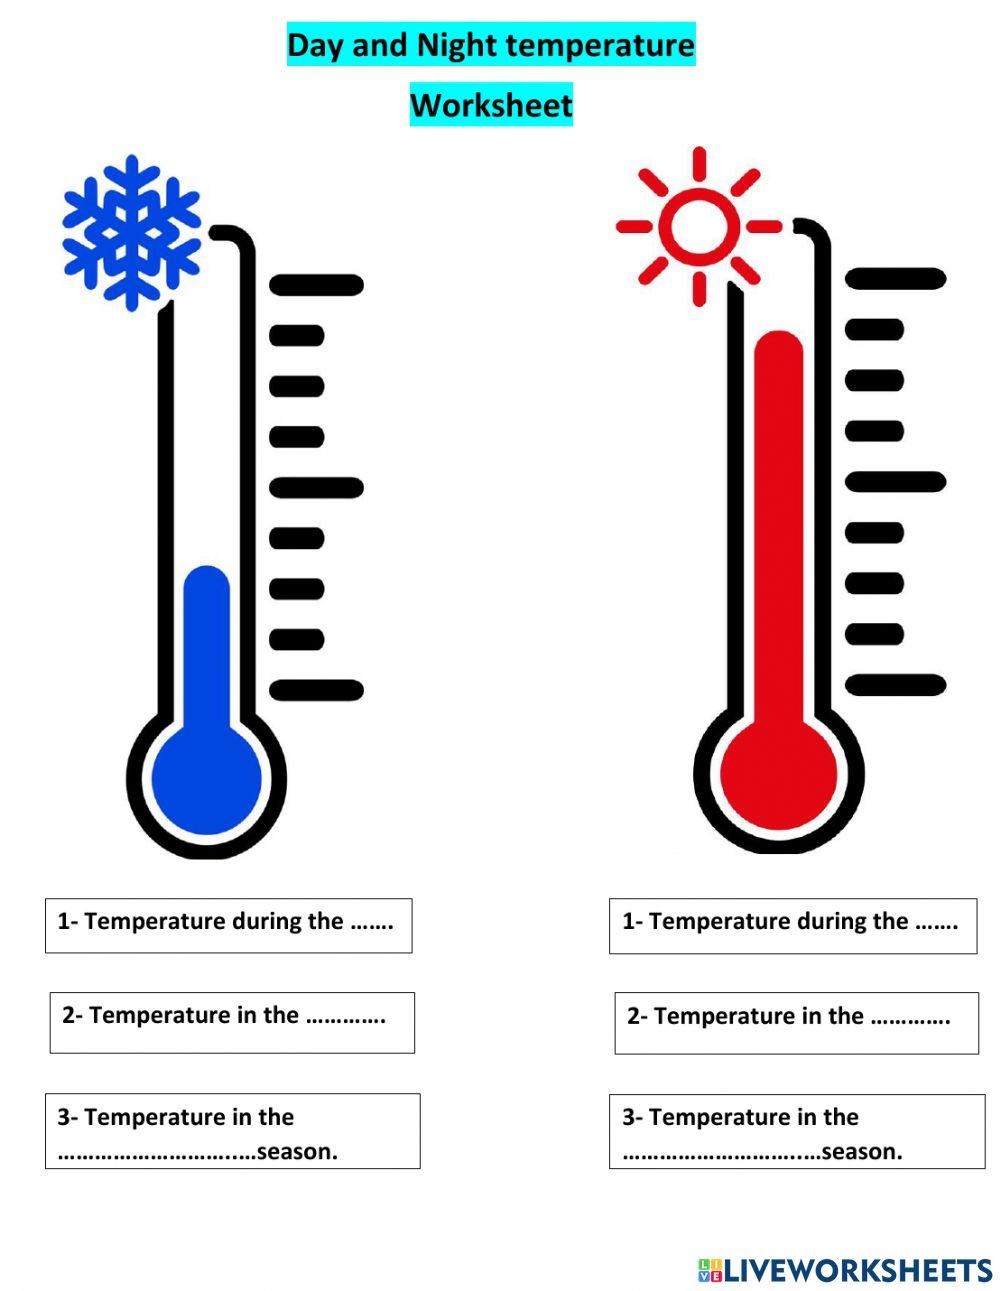 Day and night temperature